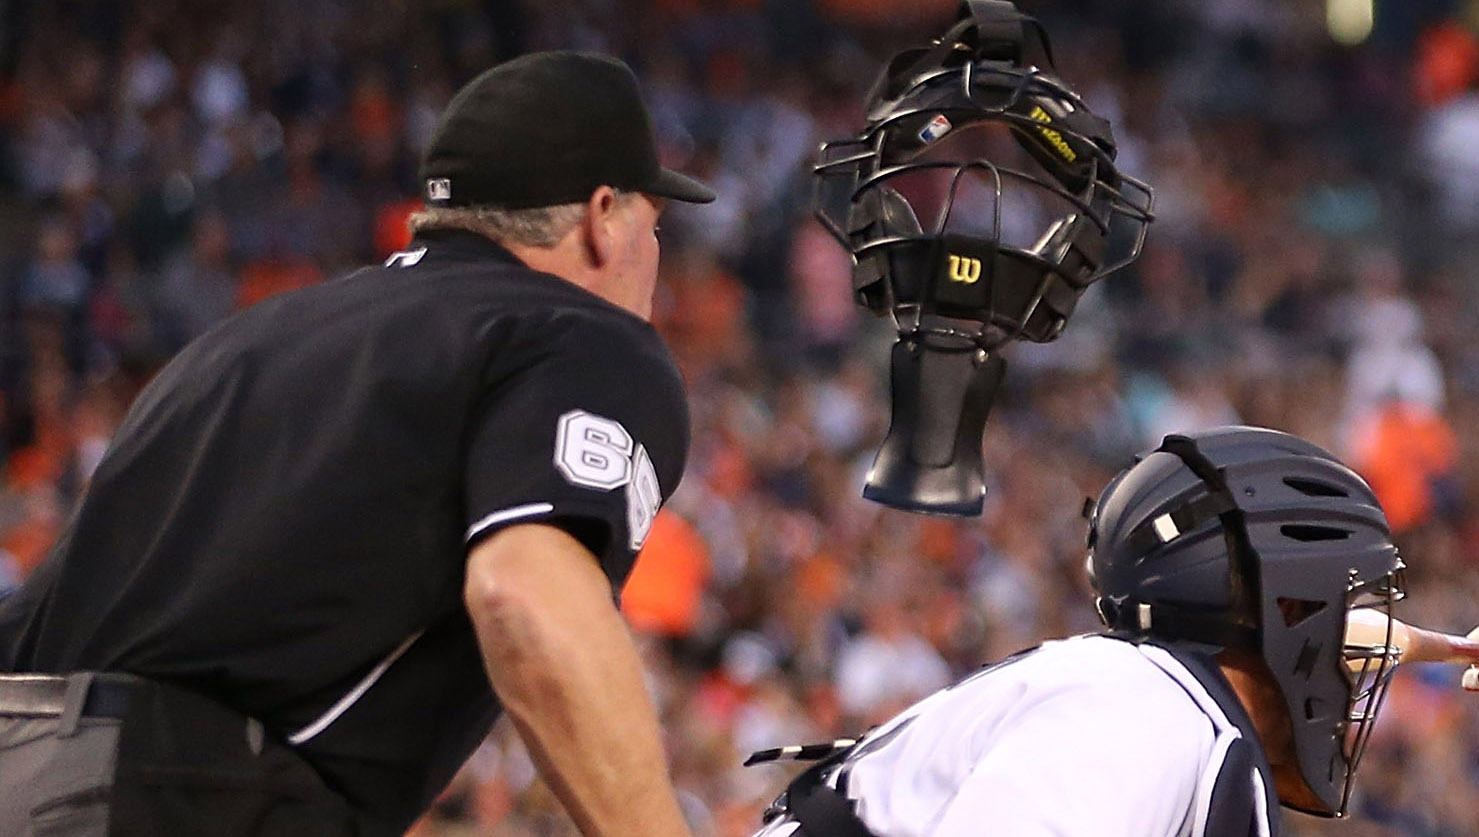 MLB umpires may get onfield microphones to explain replay review outcomes   Bless You Boys